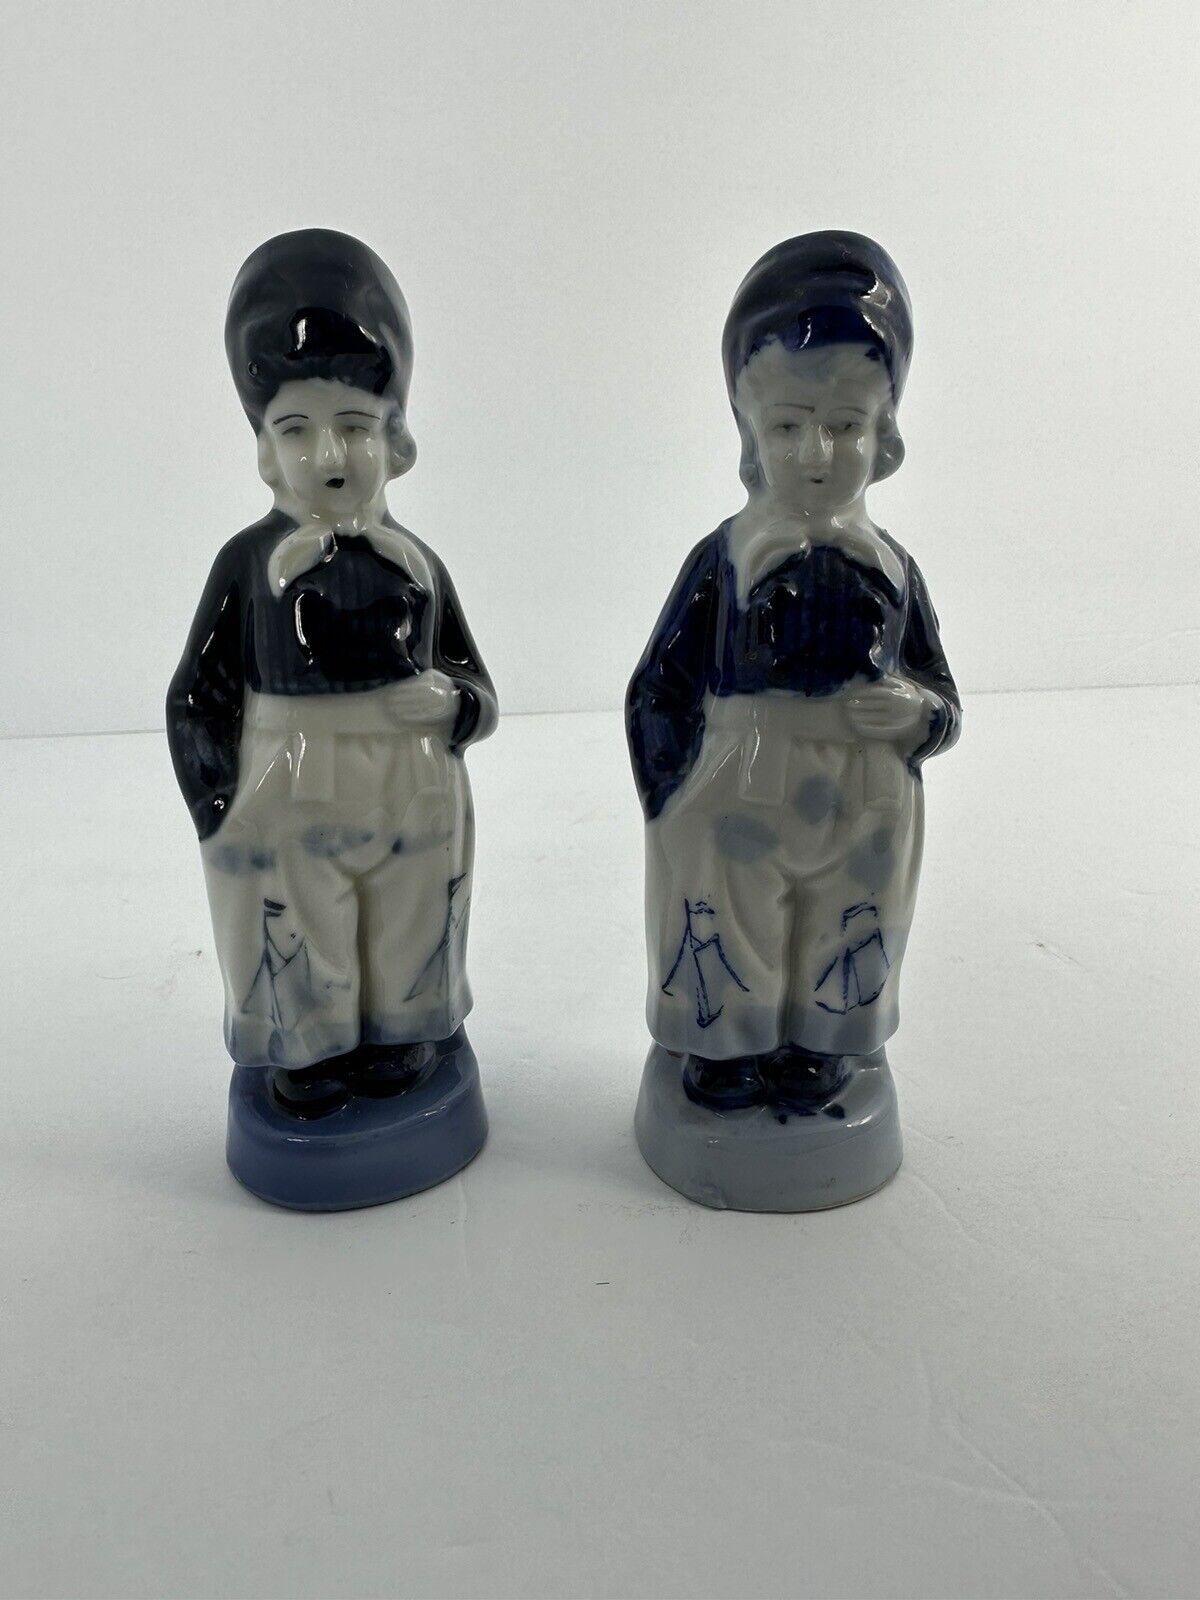 Vintage Dutch Boy Figurines Blue And White Set Of 2 Made In Japan Size 6”